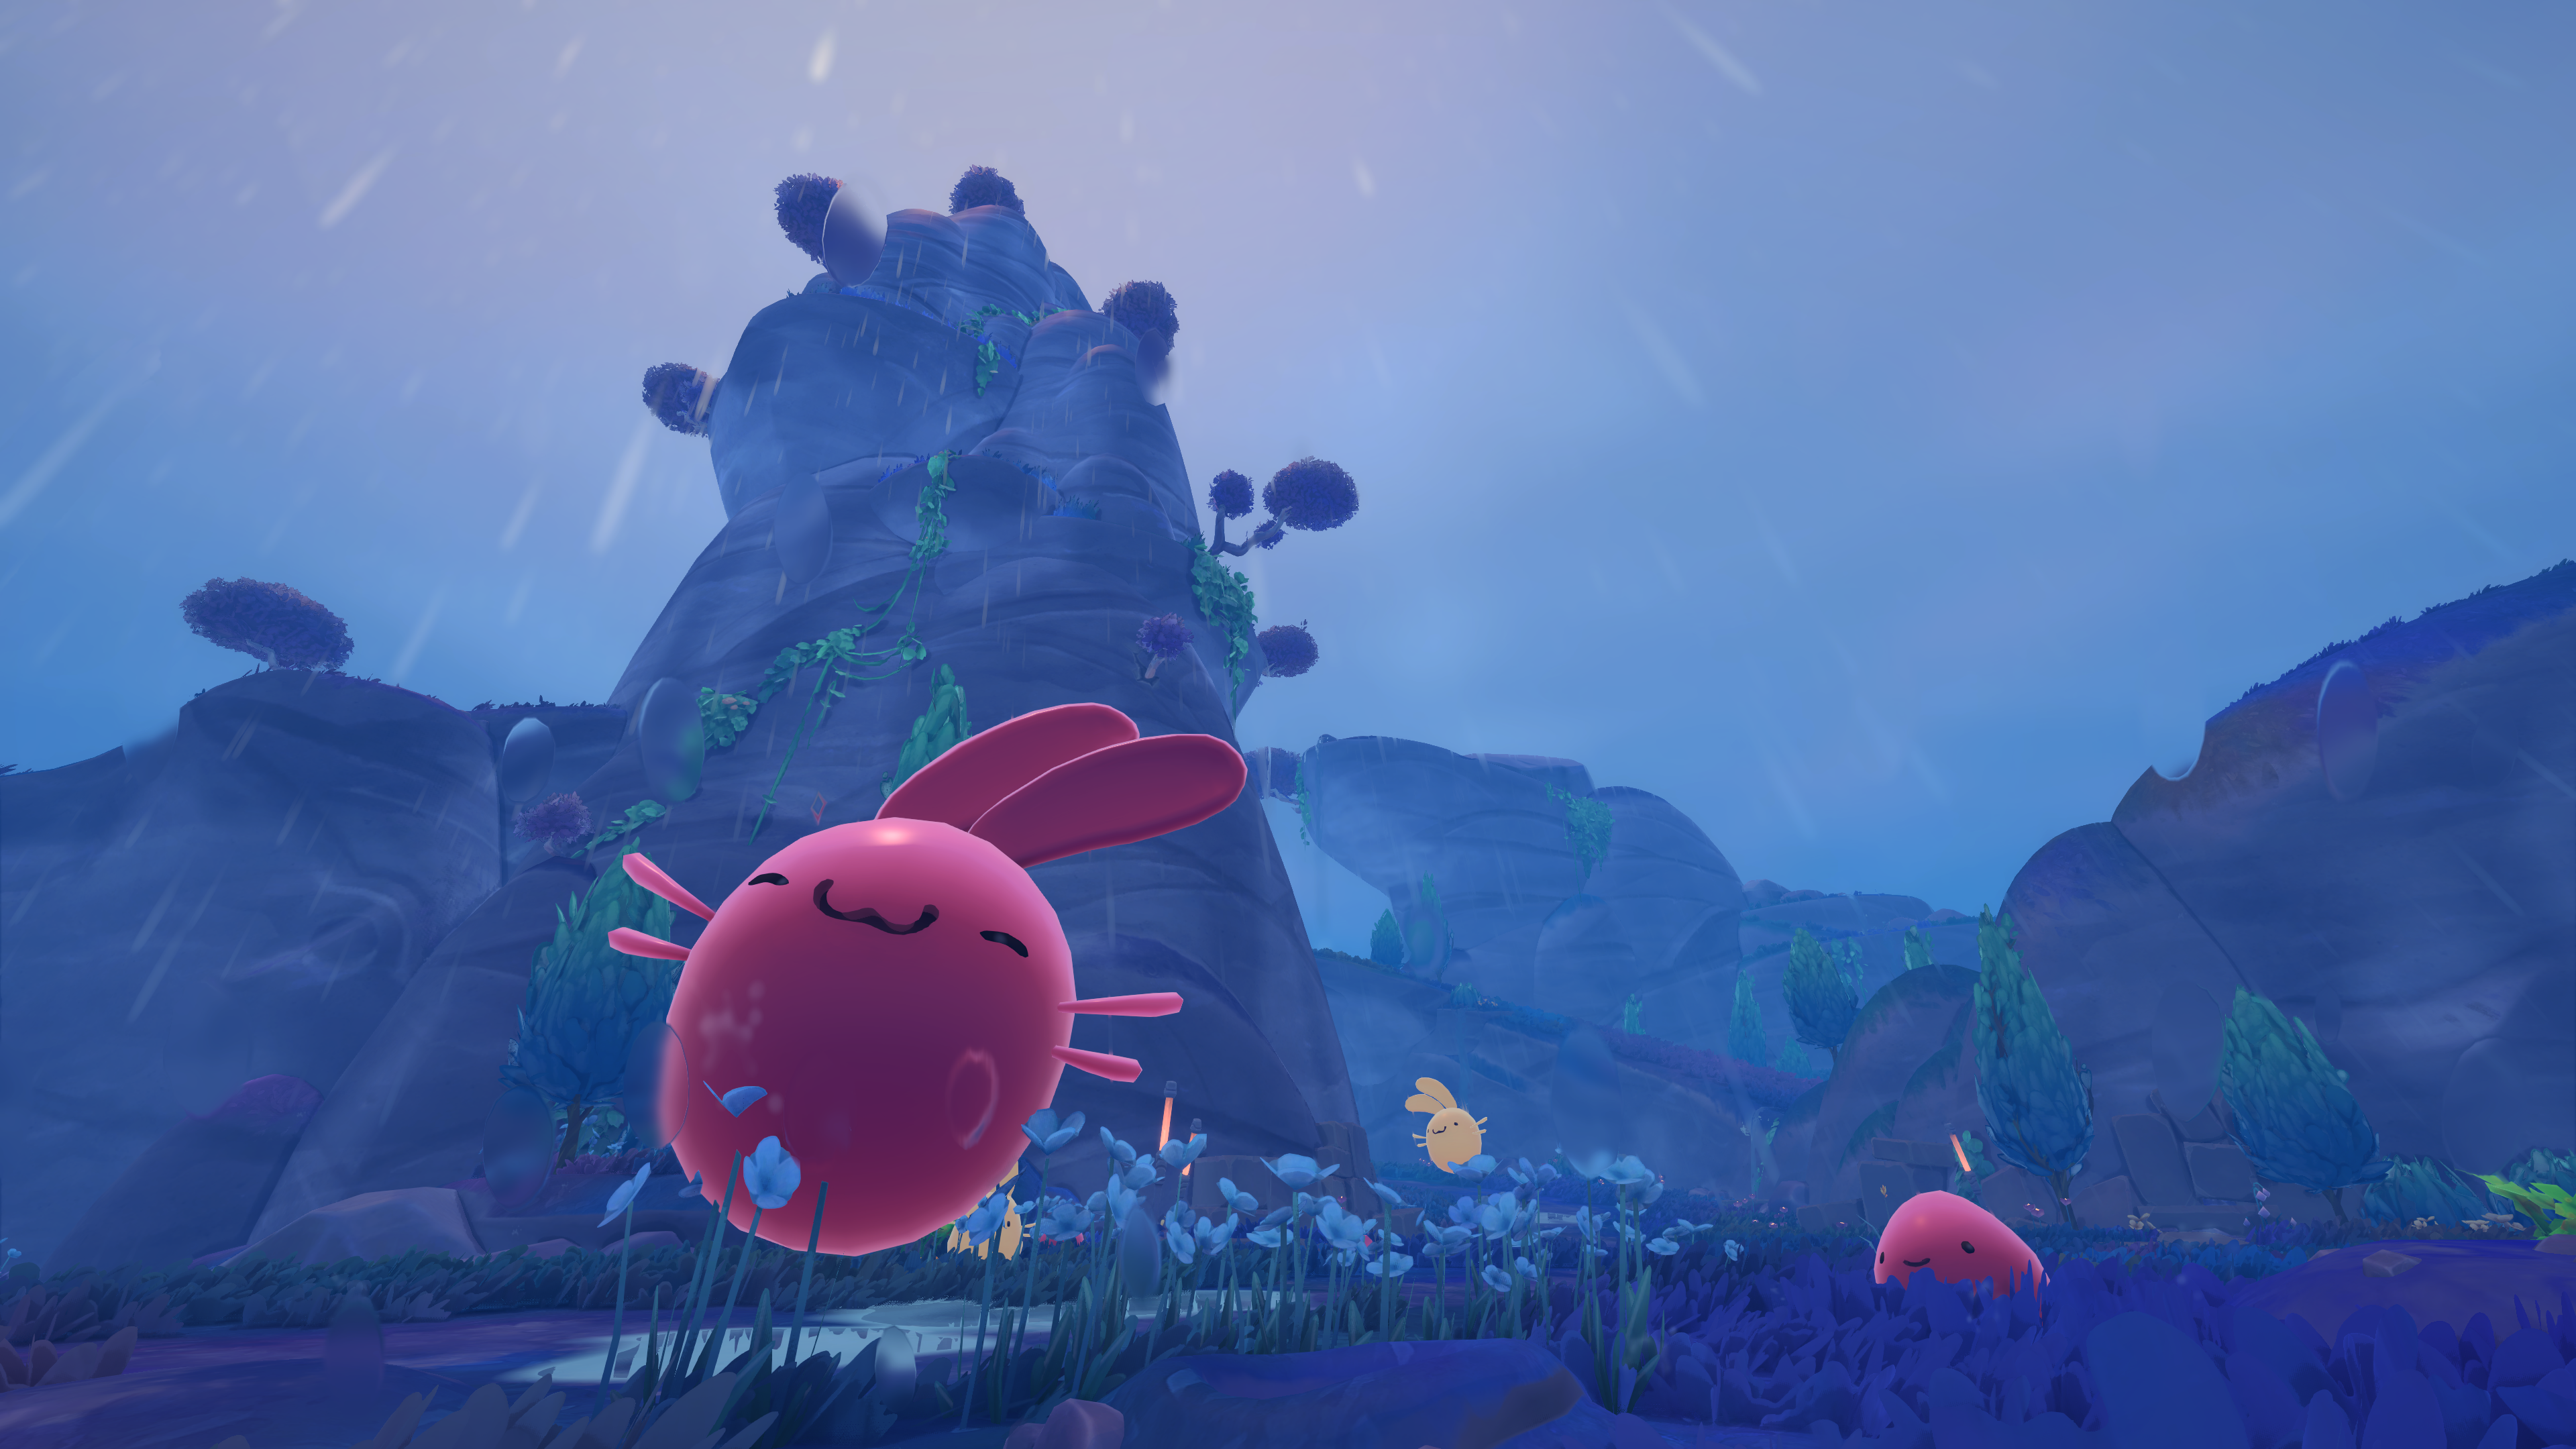 Deep Dive: The art and science of creating weather in Slime Rancher 2